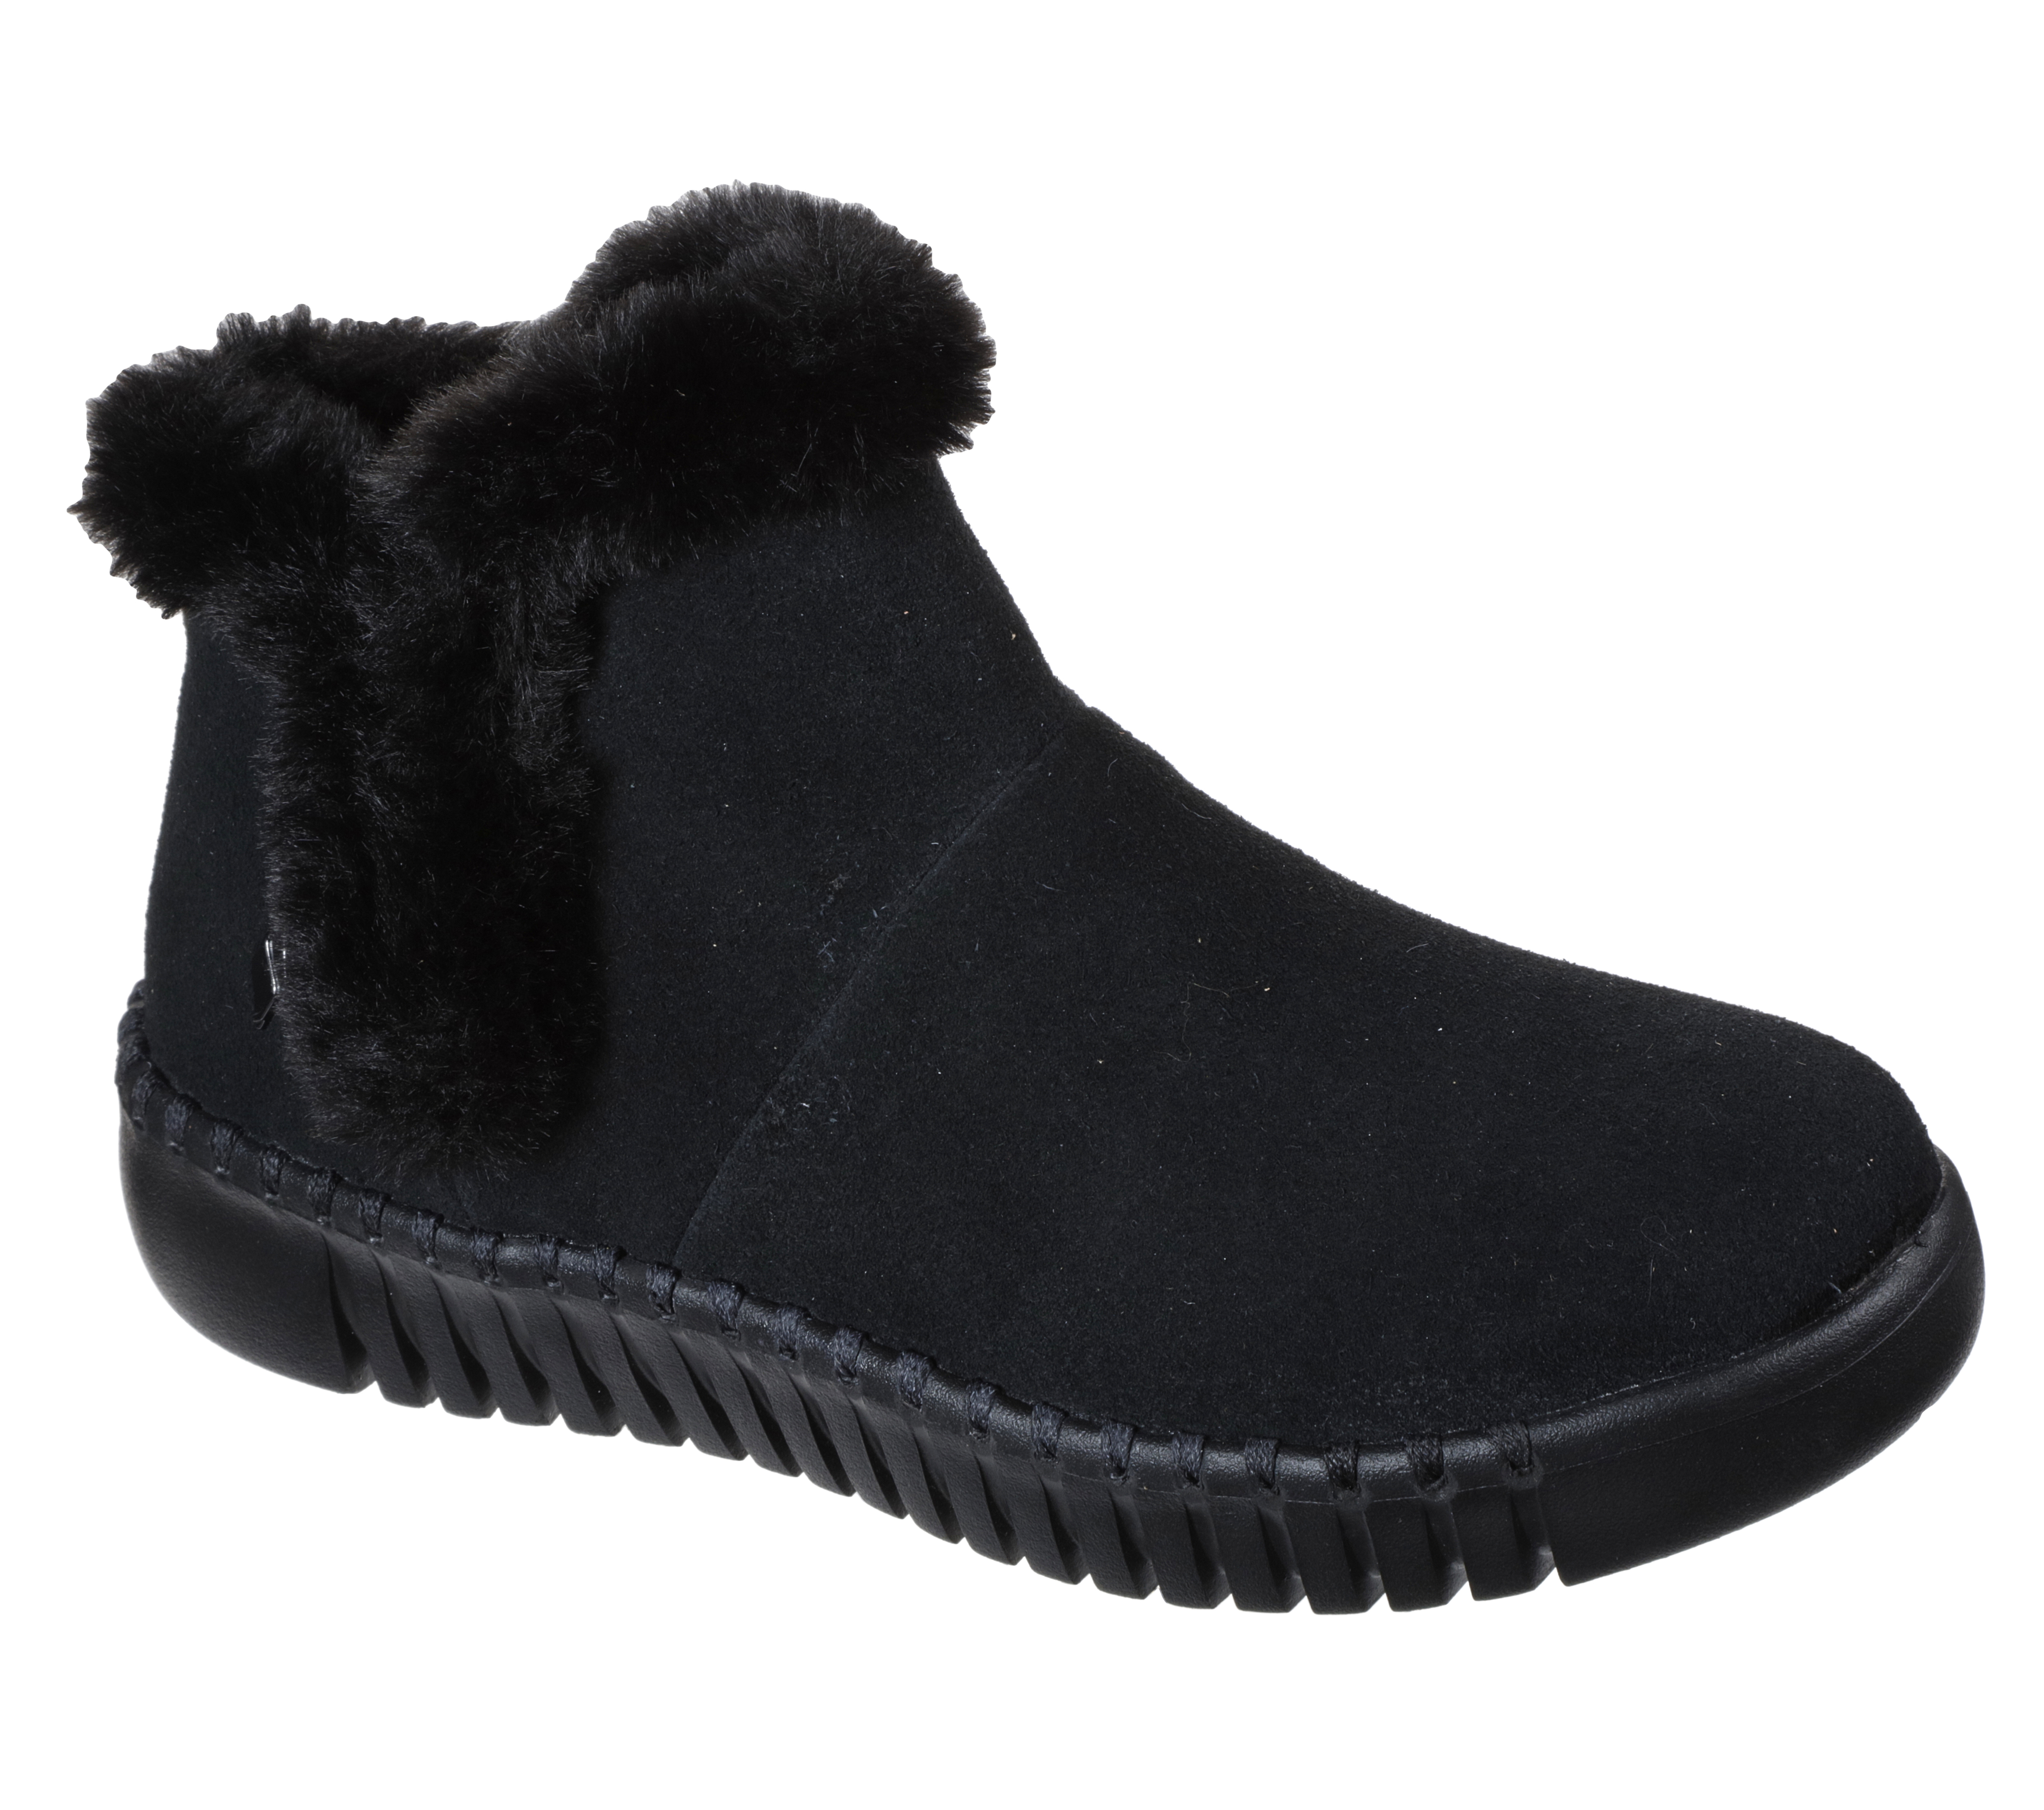 skechers go walk suede ankle boots